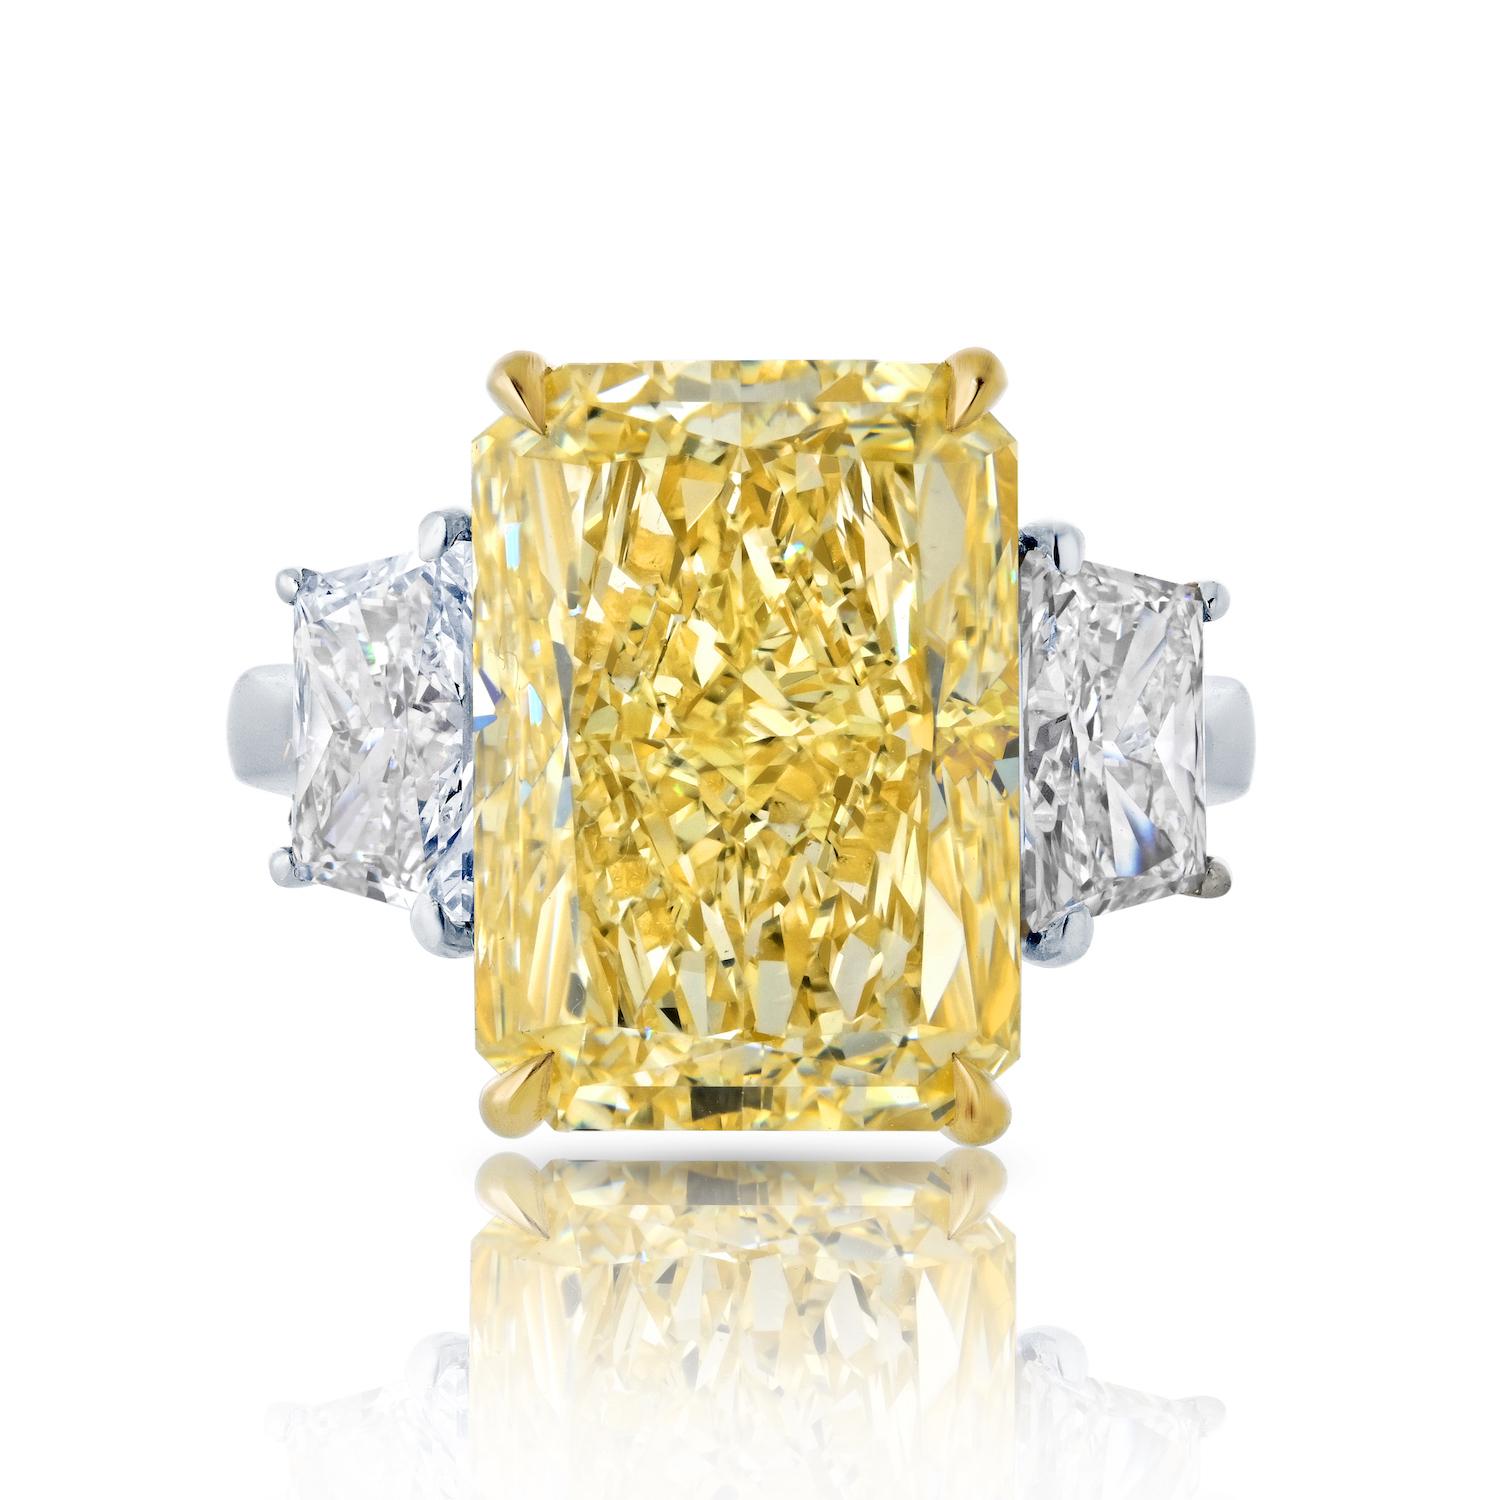 Don't miss the opportunity to make this extraordinary three stone diamond engagement ring yours. 

Featuring a breathtaking 10.07-carat radiant cut fancy yellow diamond, certified by GIA as VVS2 clarity, and brilliantly complemented by 1.57 carats